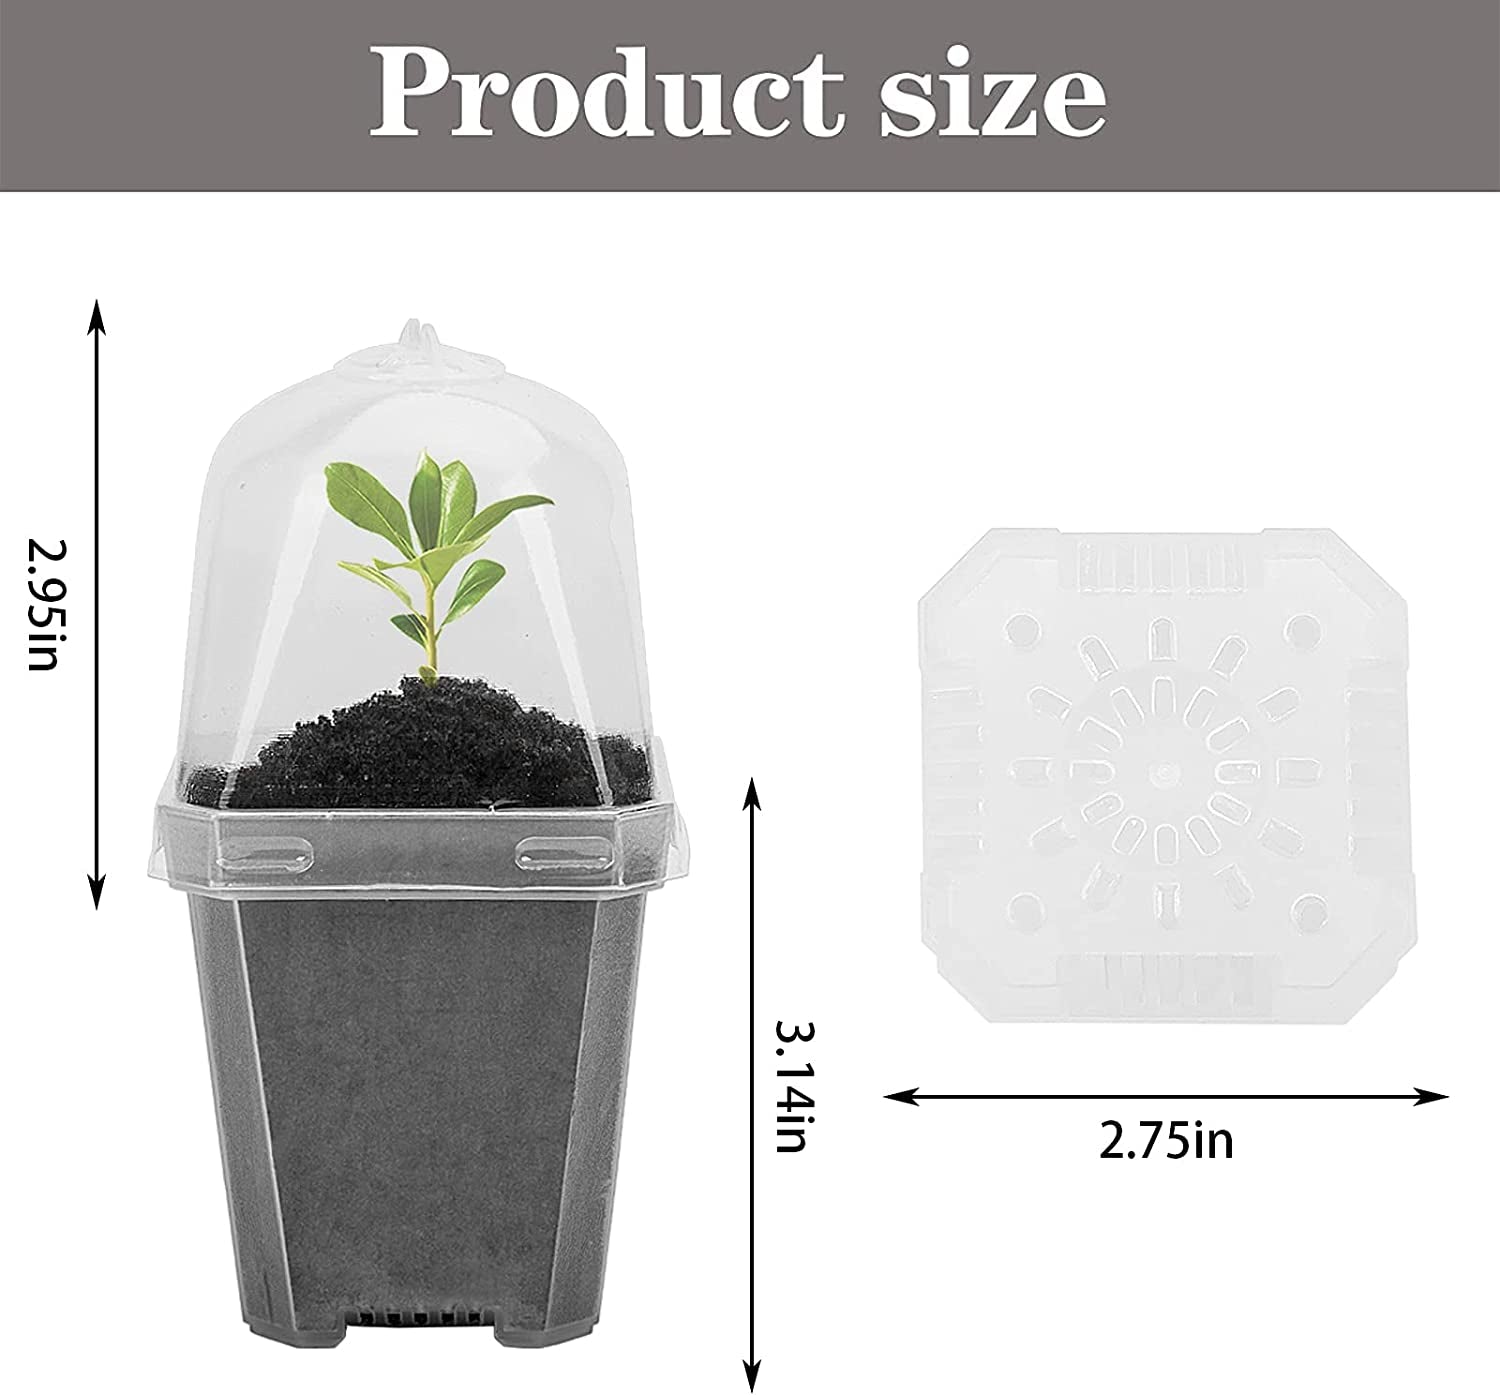 EBaokuup, Ebaokuup 30PCS Clear Plant Nursery Pots with Humidity Dome - 3" Durable Plastic Gardening Pot with Labels, Small Plant Container for Seedlings/Vegetables/Succulents/Cuttings